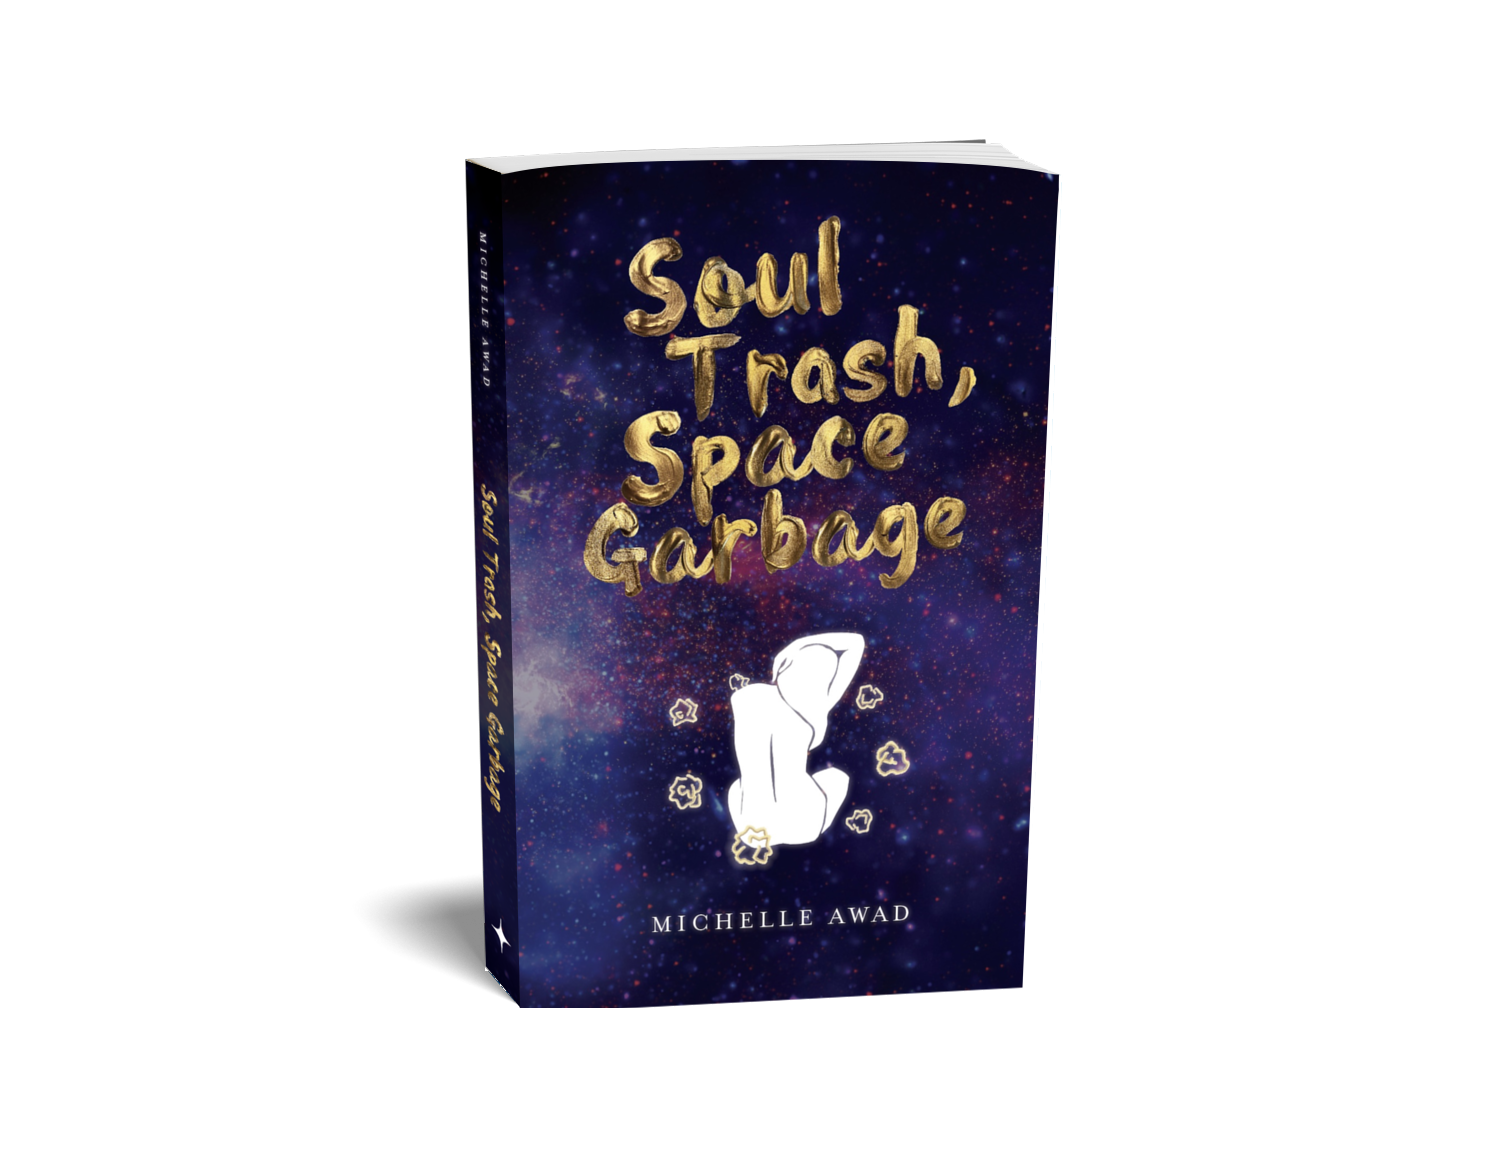 Purple celestial book cover reading Soul Trash, Space Garbage in gold text.